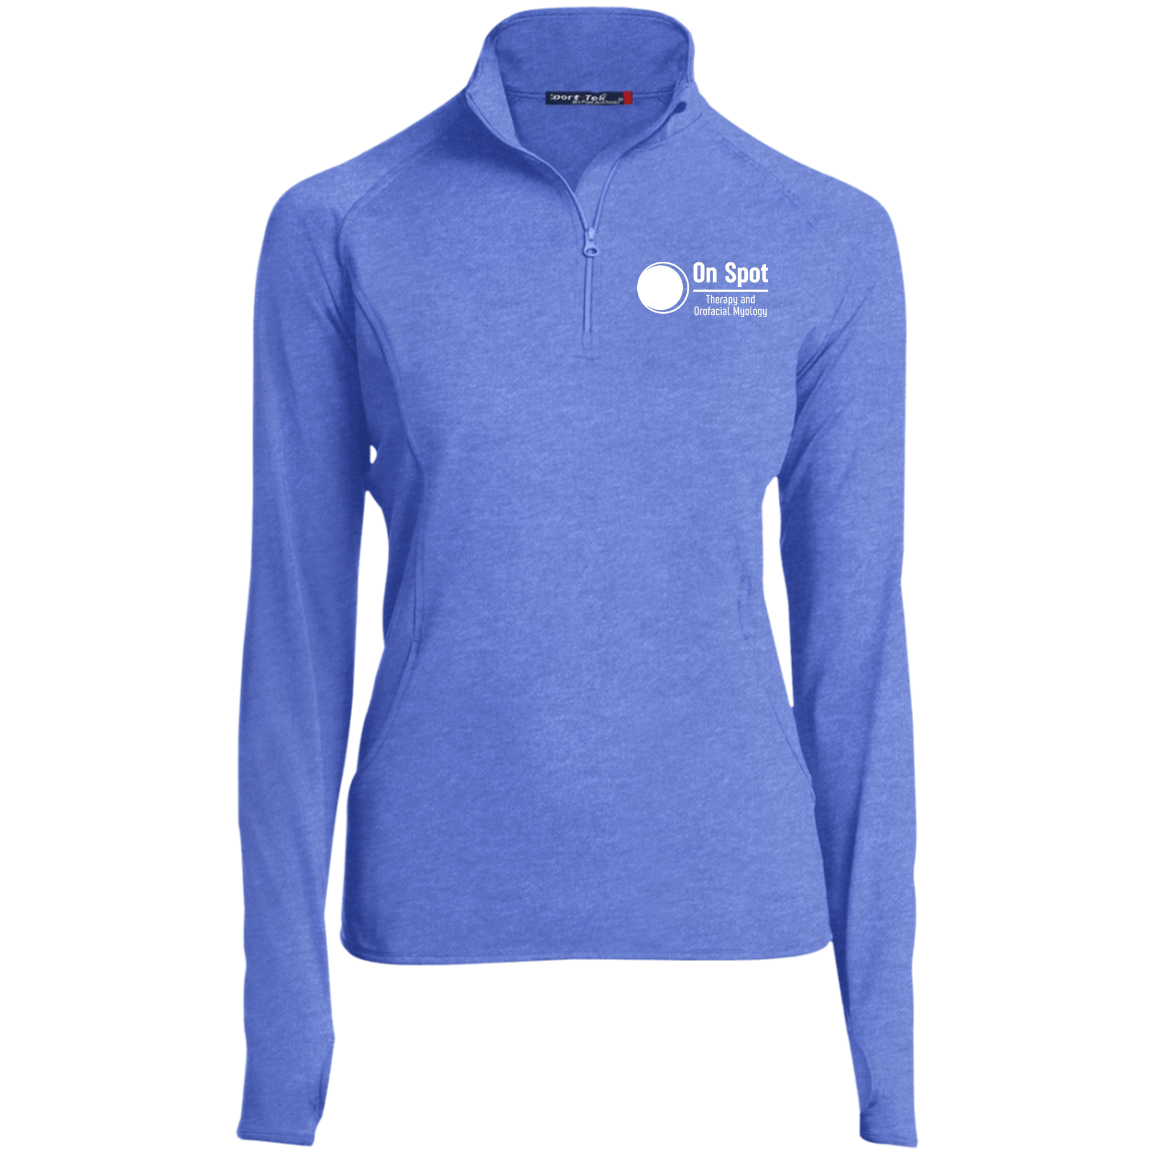 OS Womens 1/2 Zip Performance Pullover